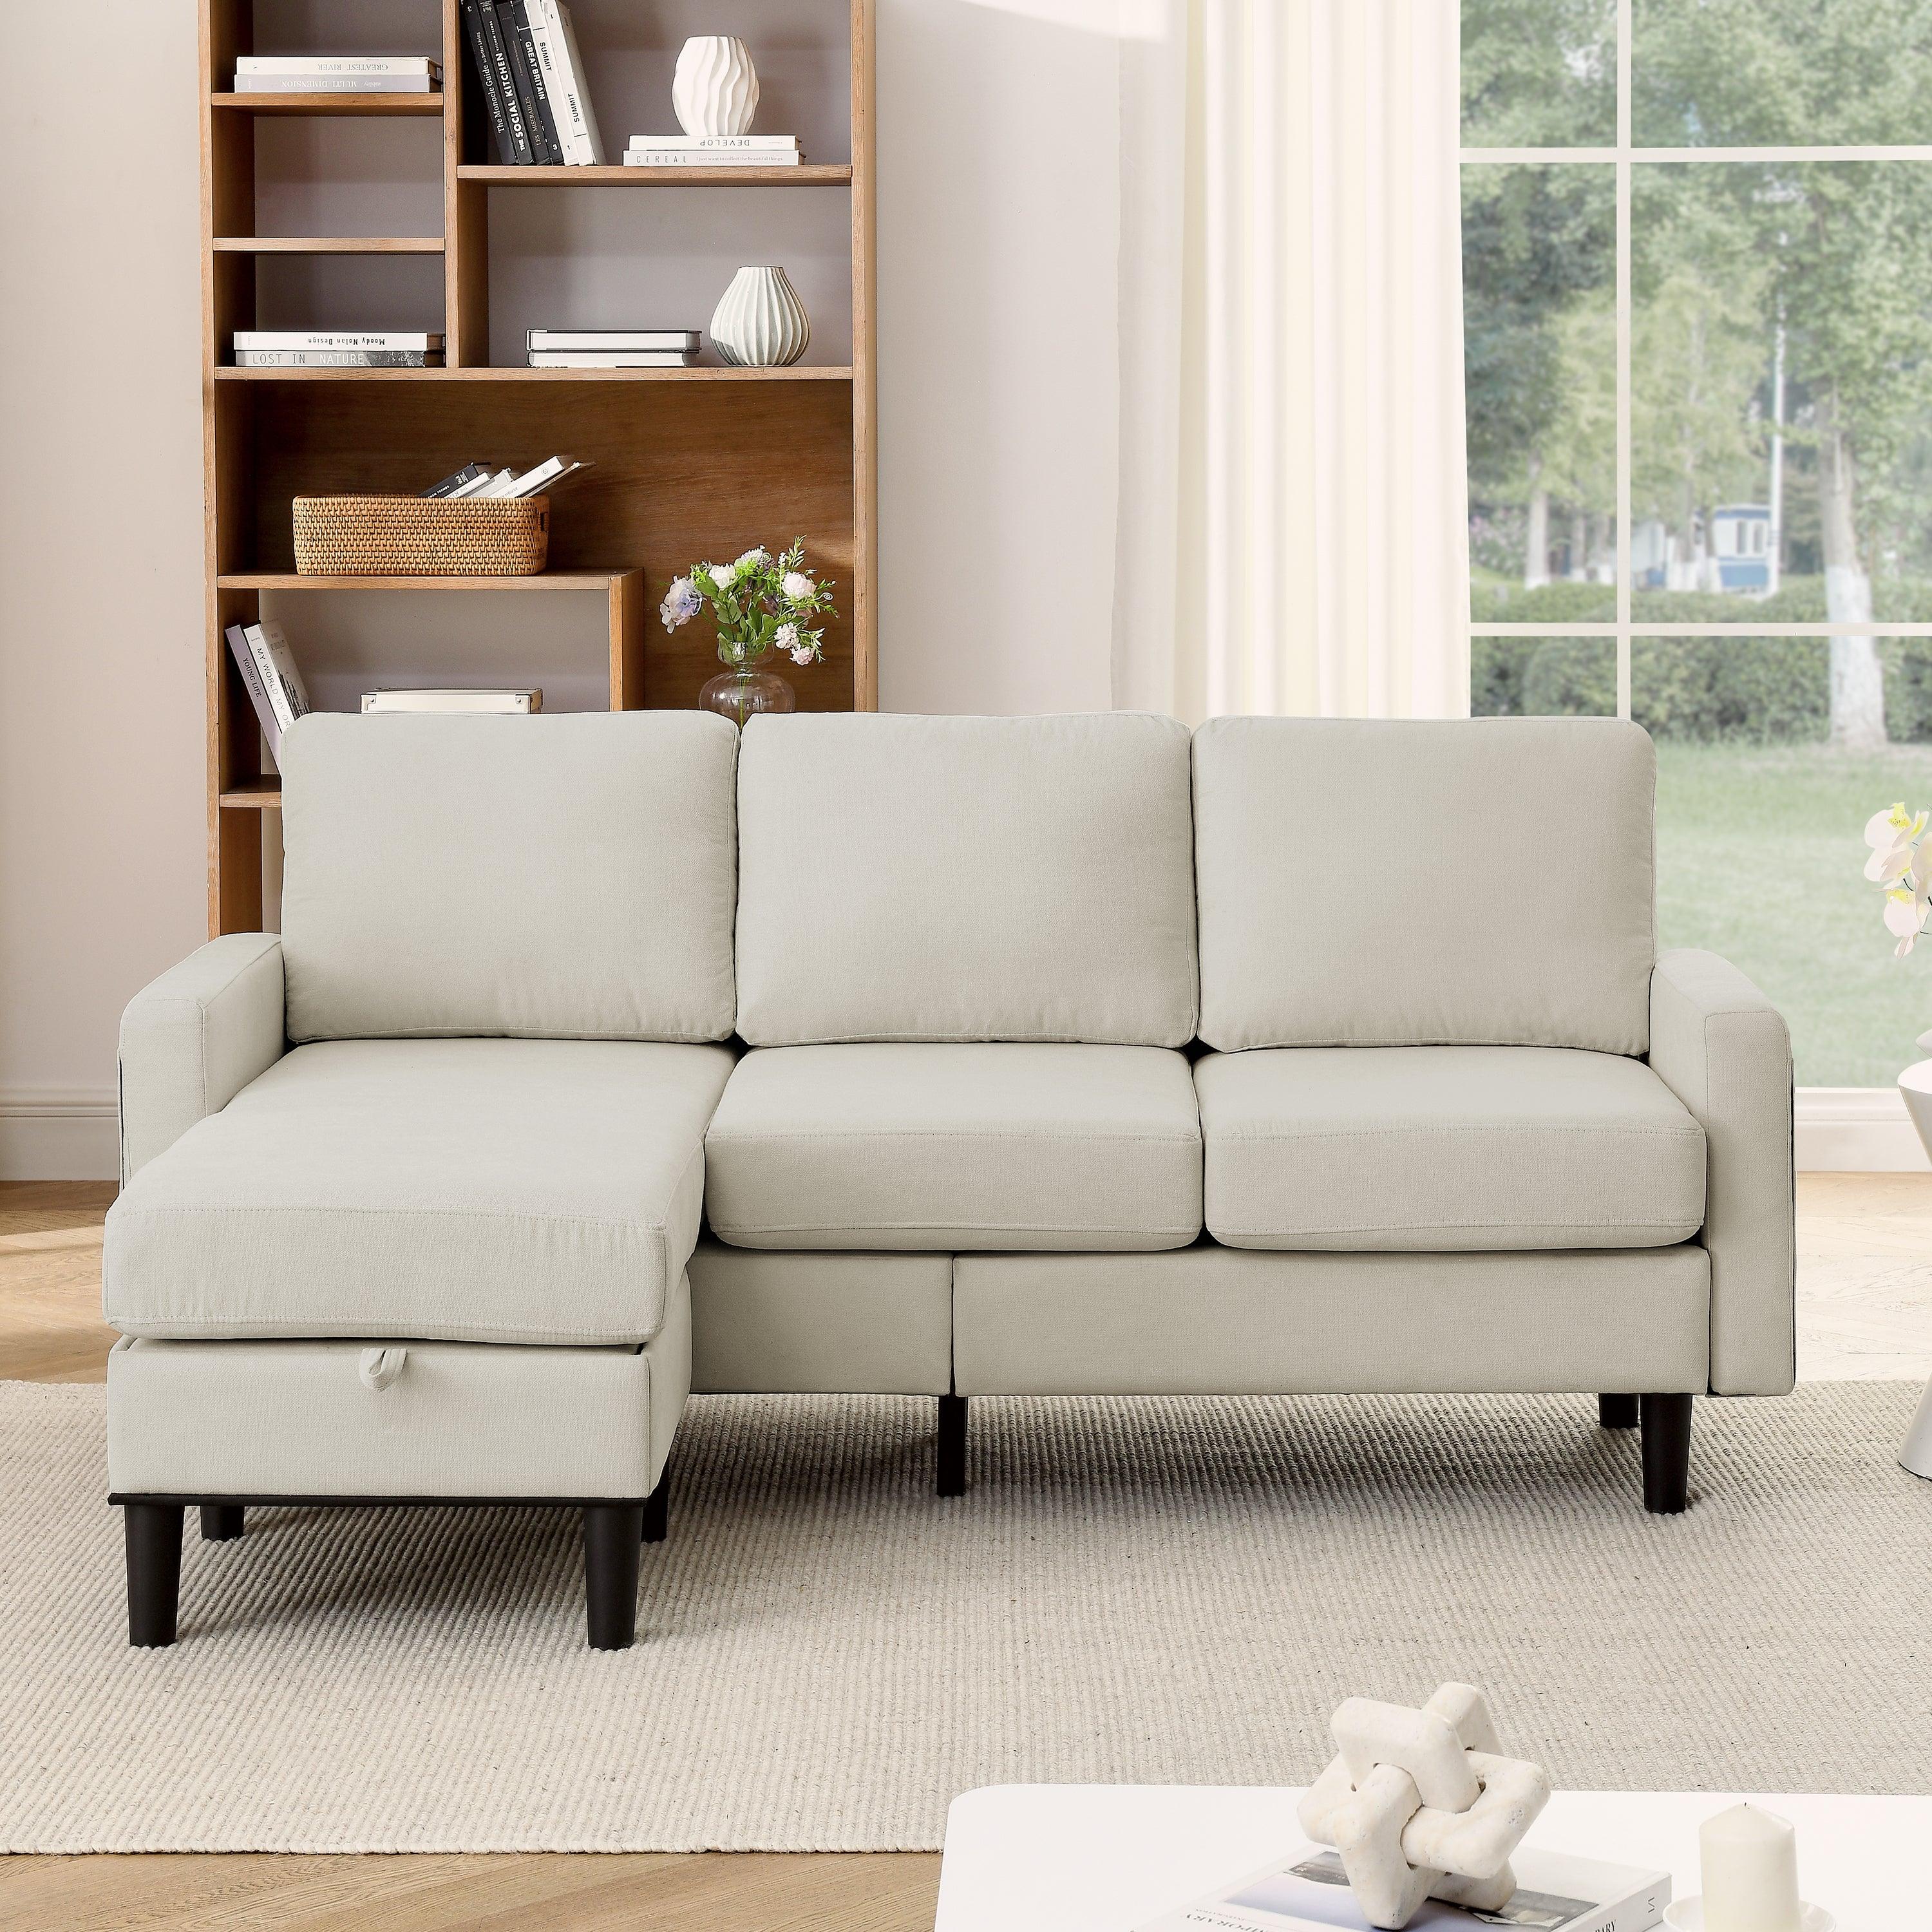 🆓🚛 Upholstered Sectional Sofa Couch, L Shaped Couch With Storage Reversible Ottoman Bench 3 Seater for Living Room, Apartment, Compact Spaces, Fabric Beige